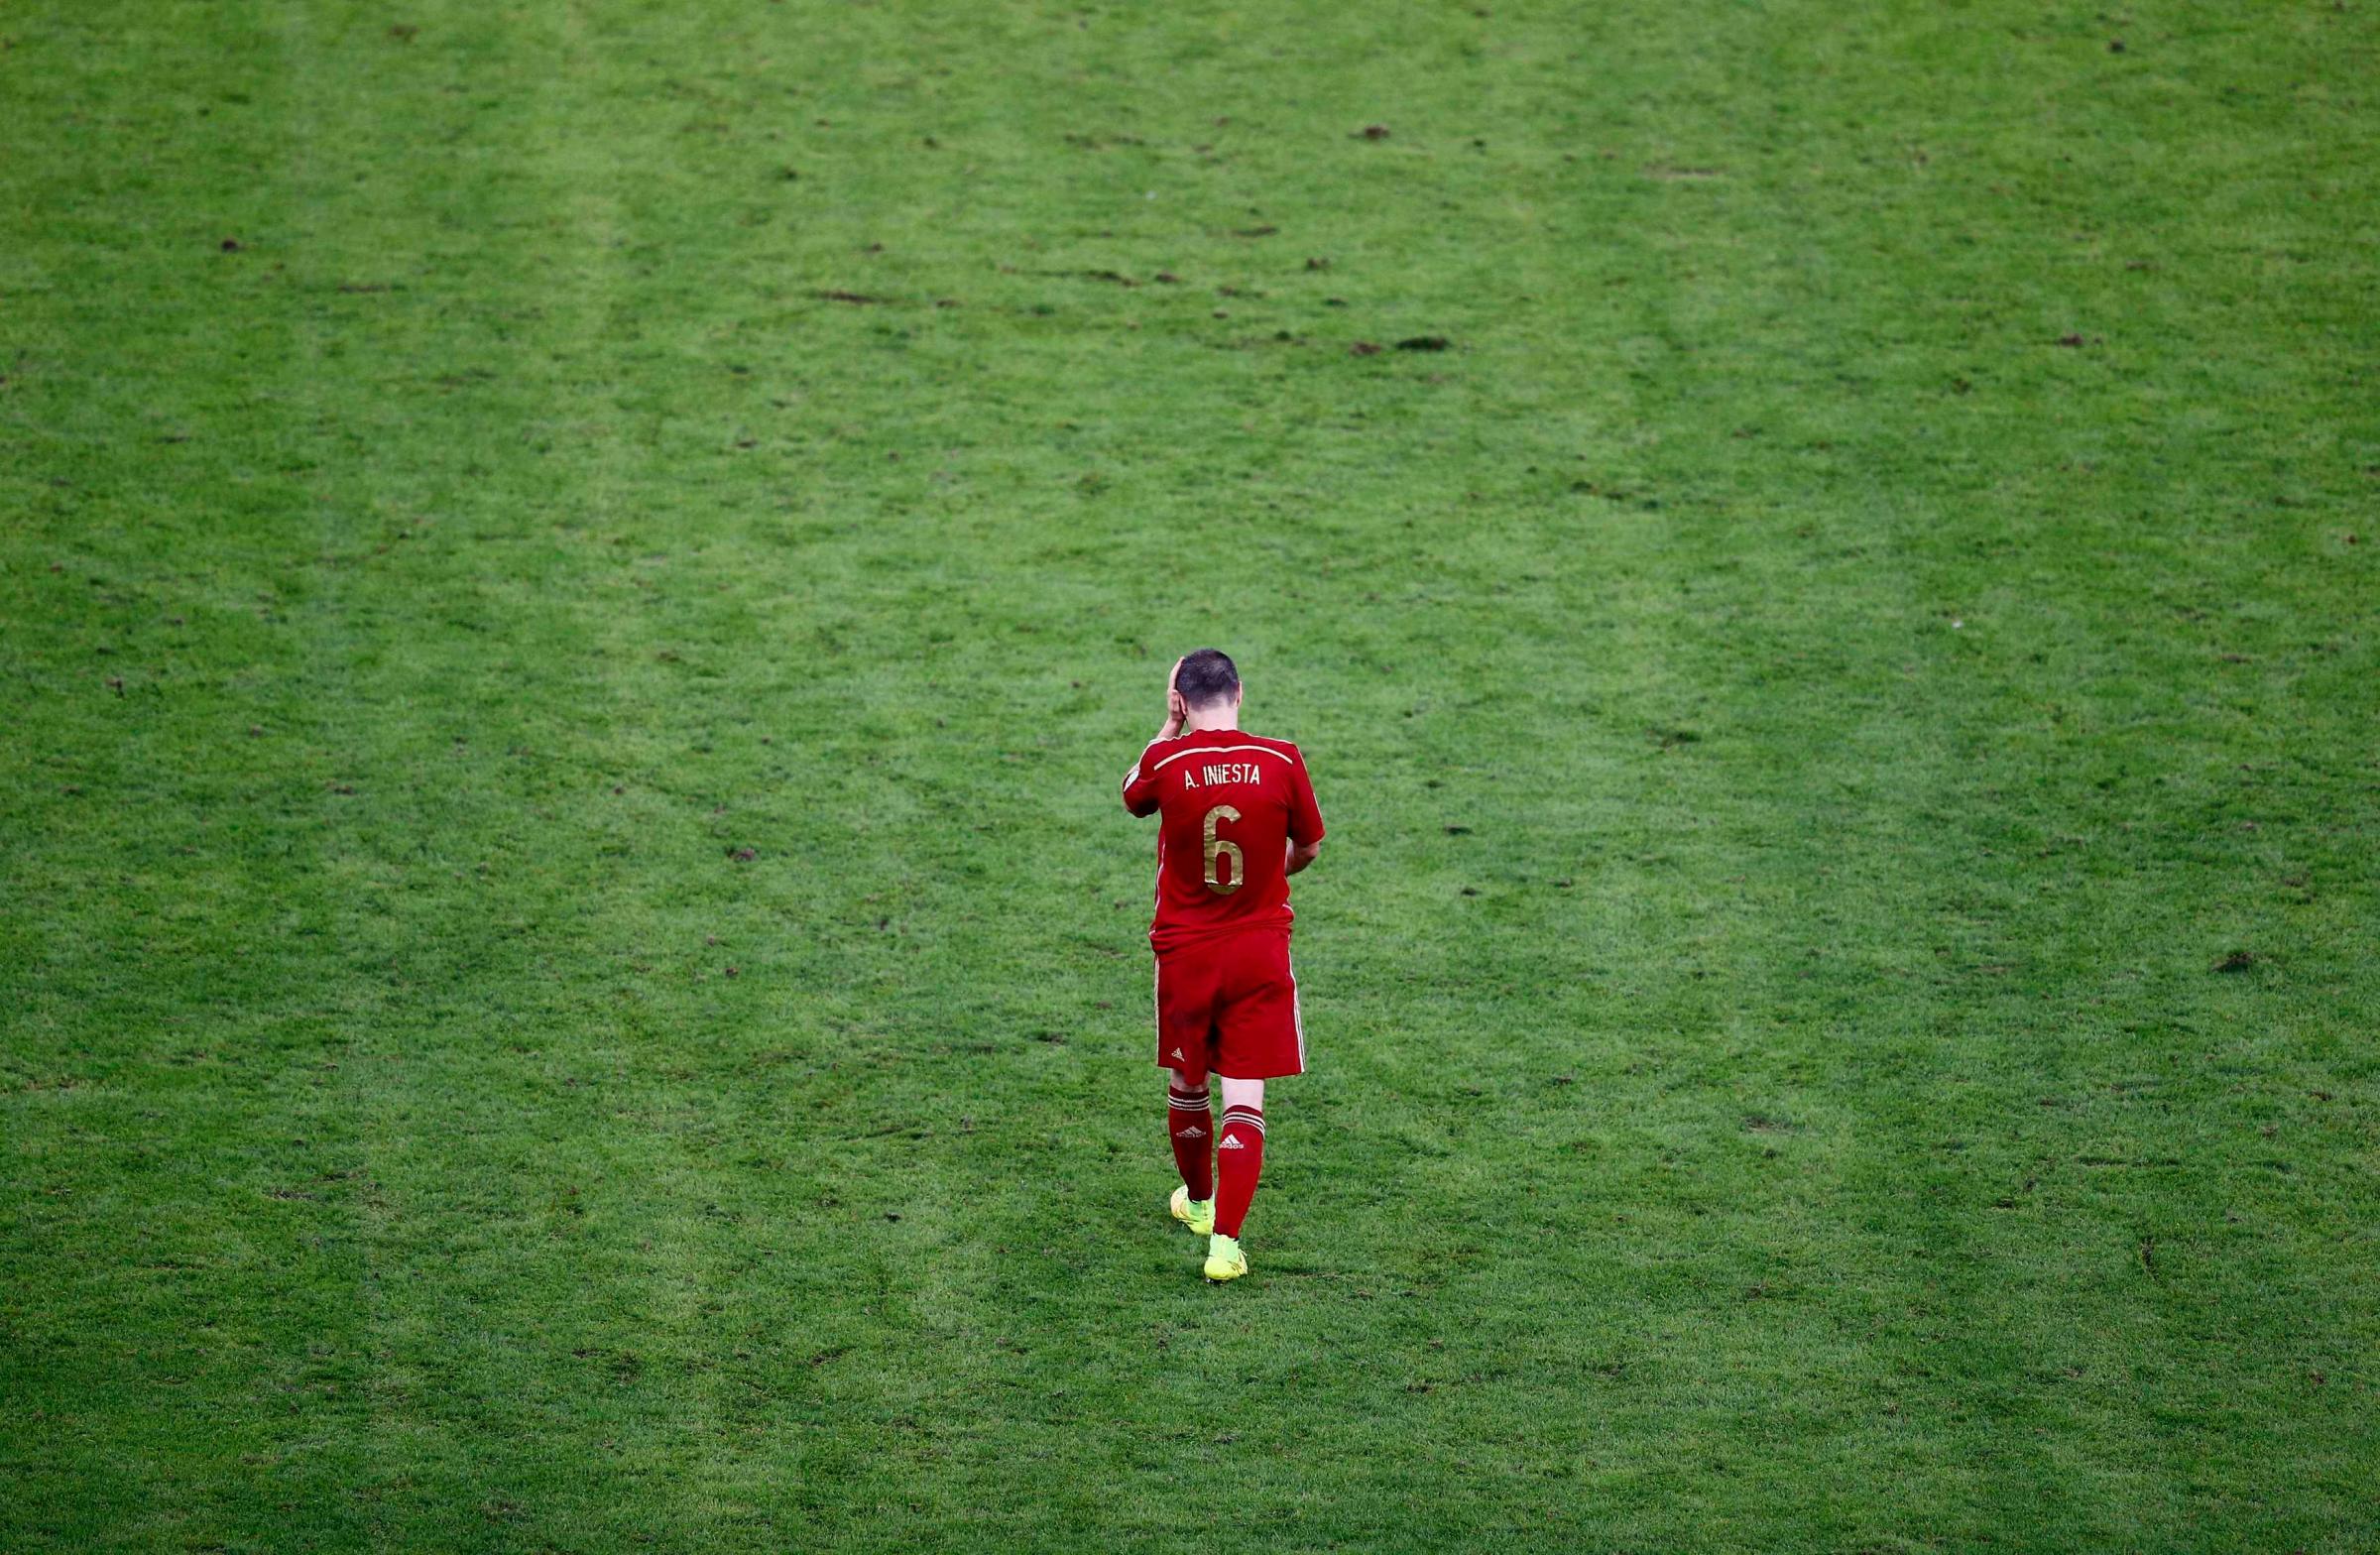 Spain's Andres Iniesta walks on the pitch during the 2014 World Cup Group B soccer match between Spain and Chile at the Maracana stadium in Rio de Janeiro on June 18, 2014.